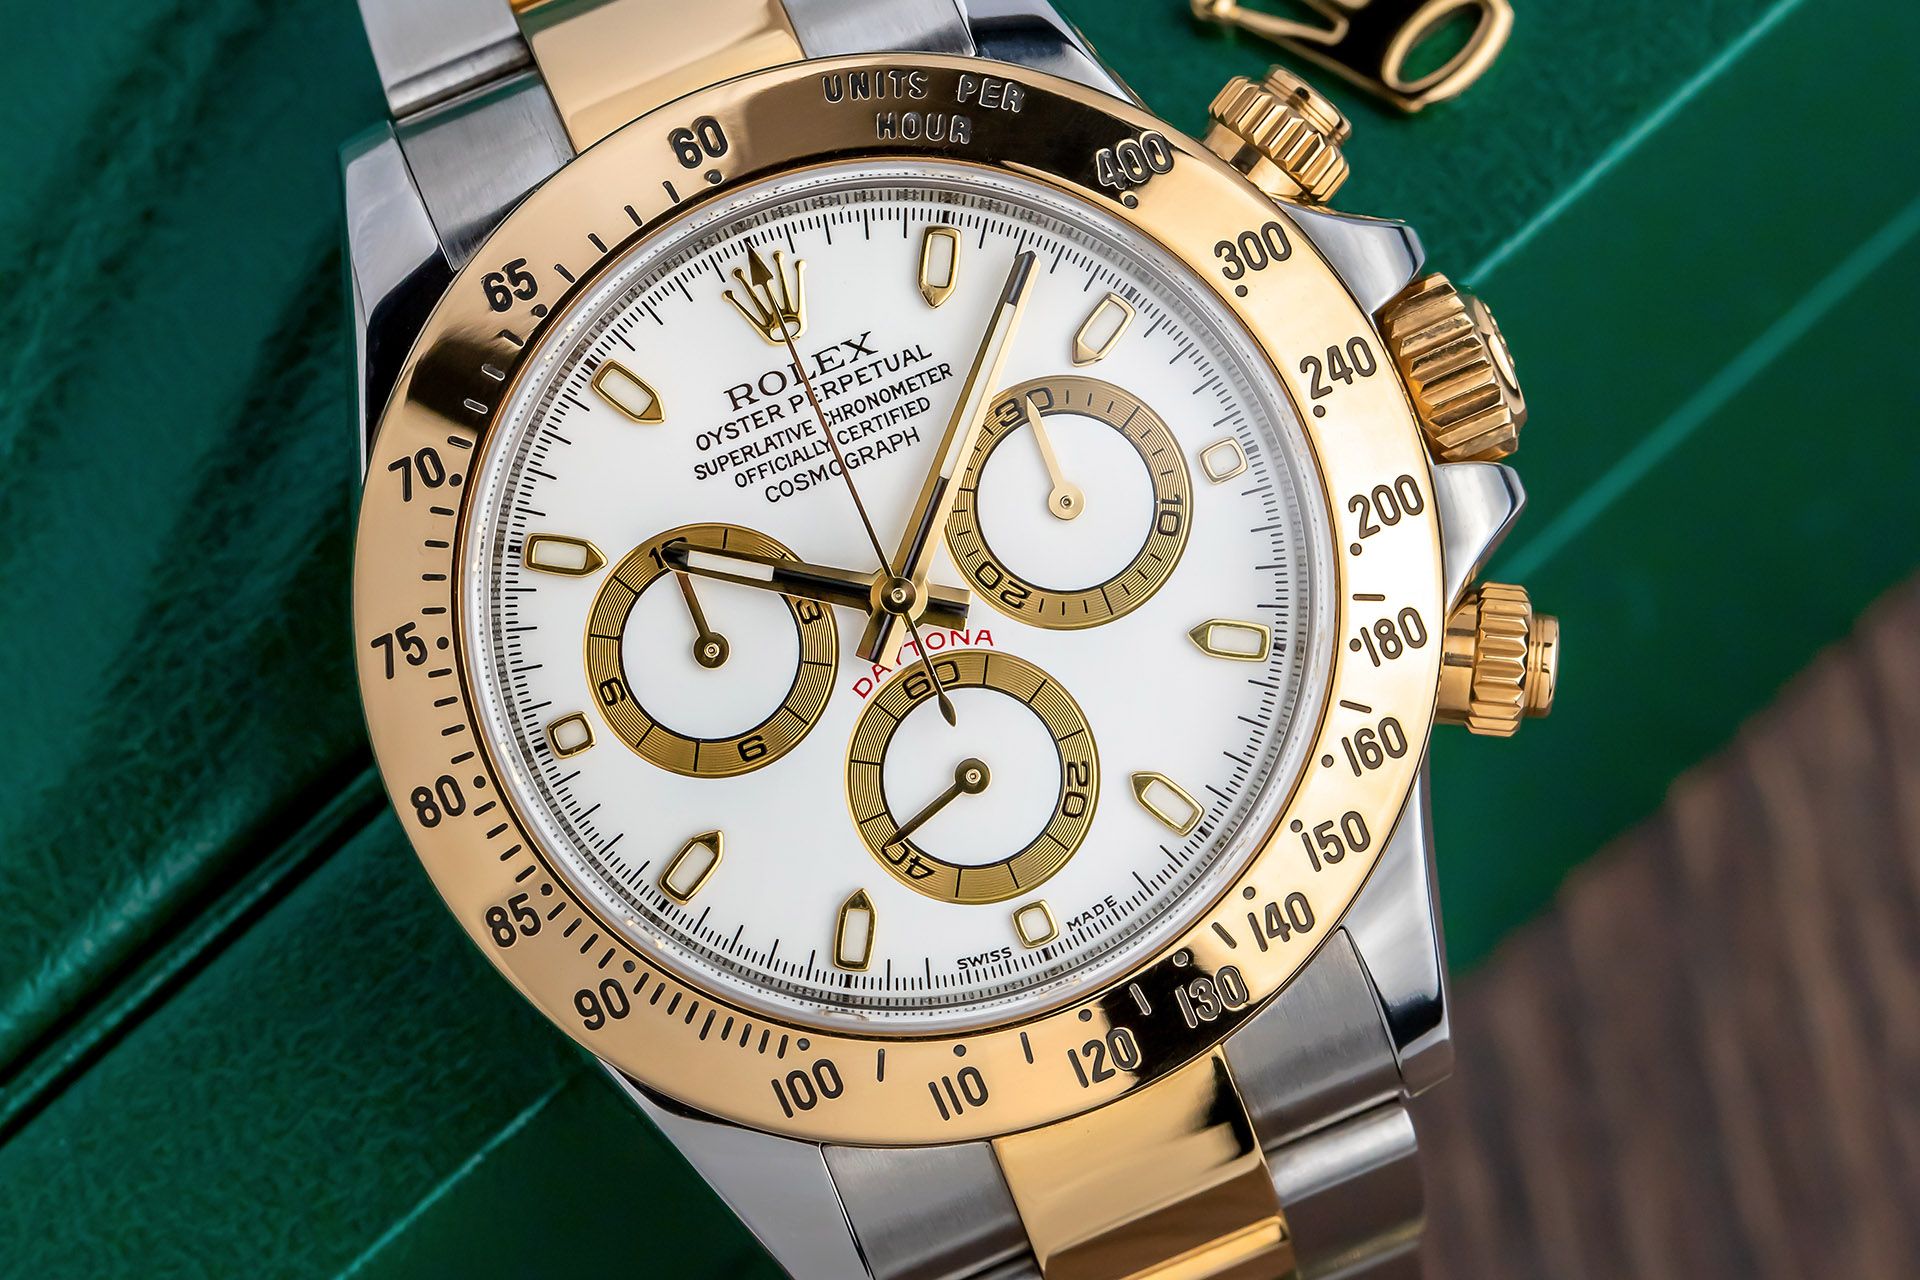 renere Rosefarve mynte These Are The Best Pre Owned Rolex Watches For Investment